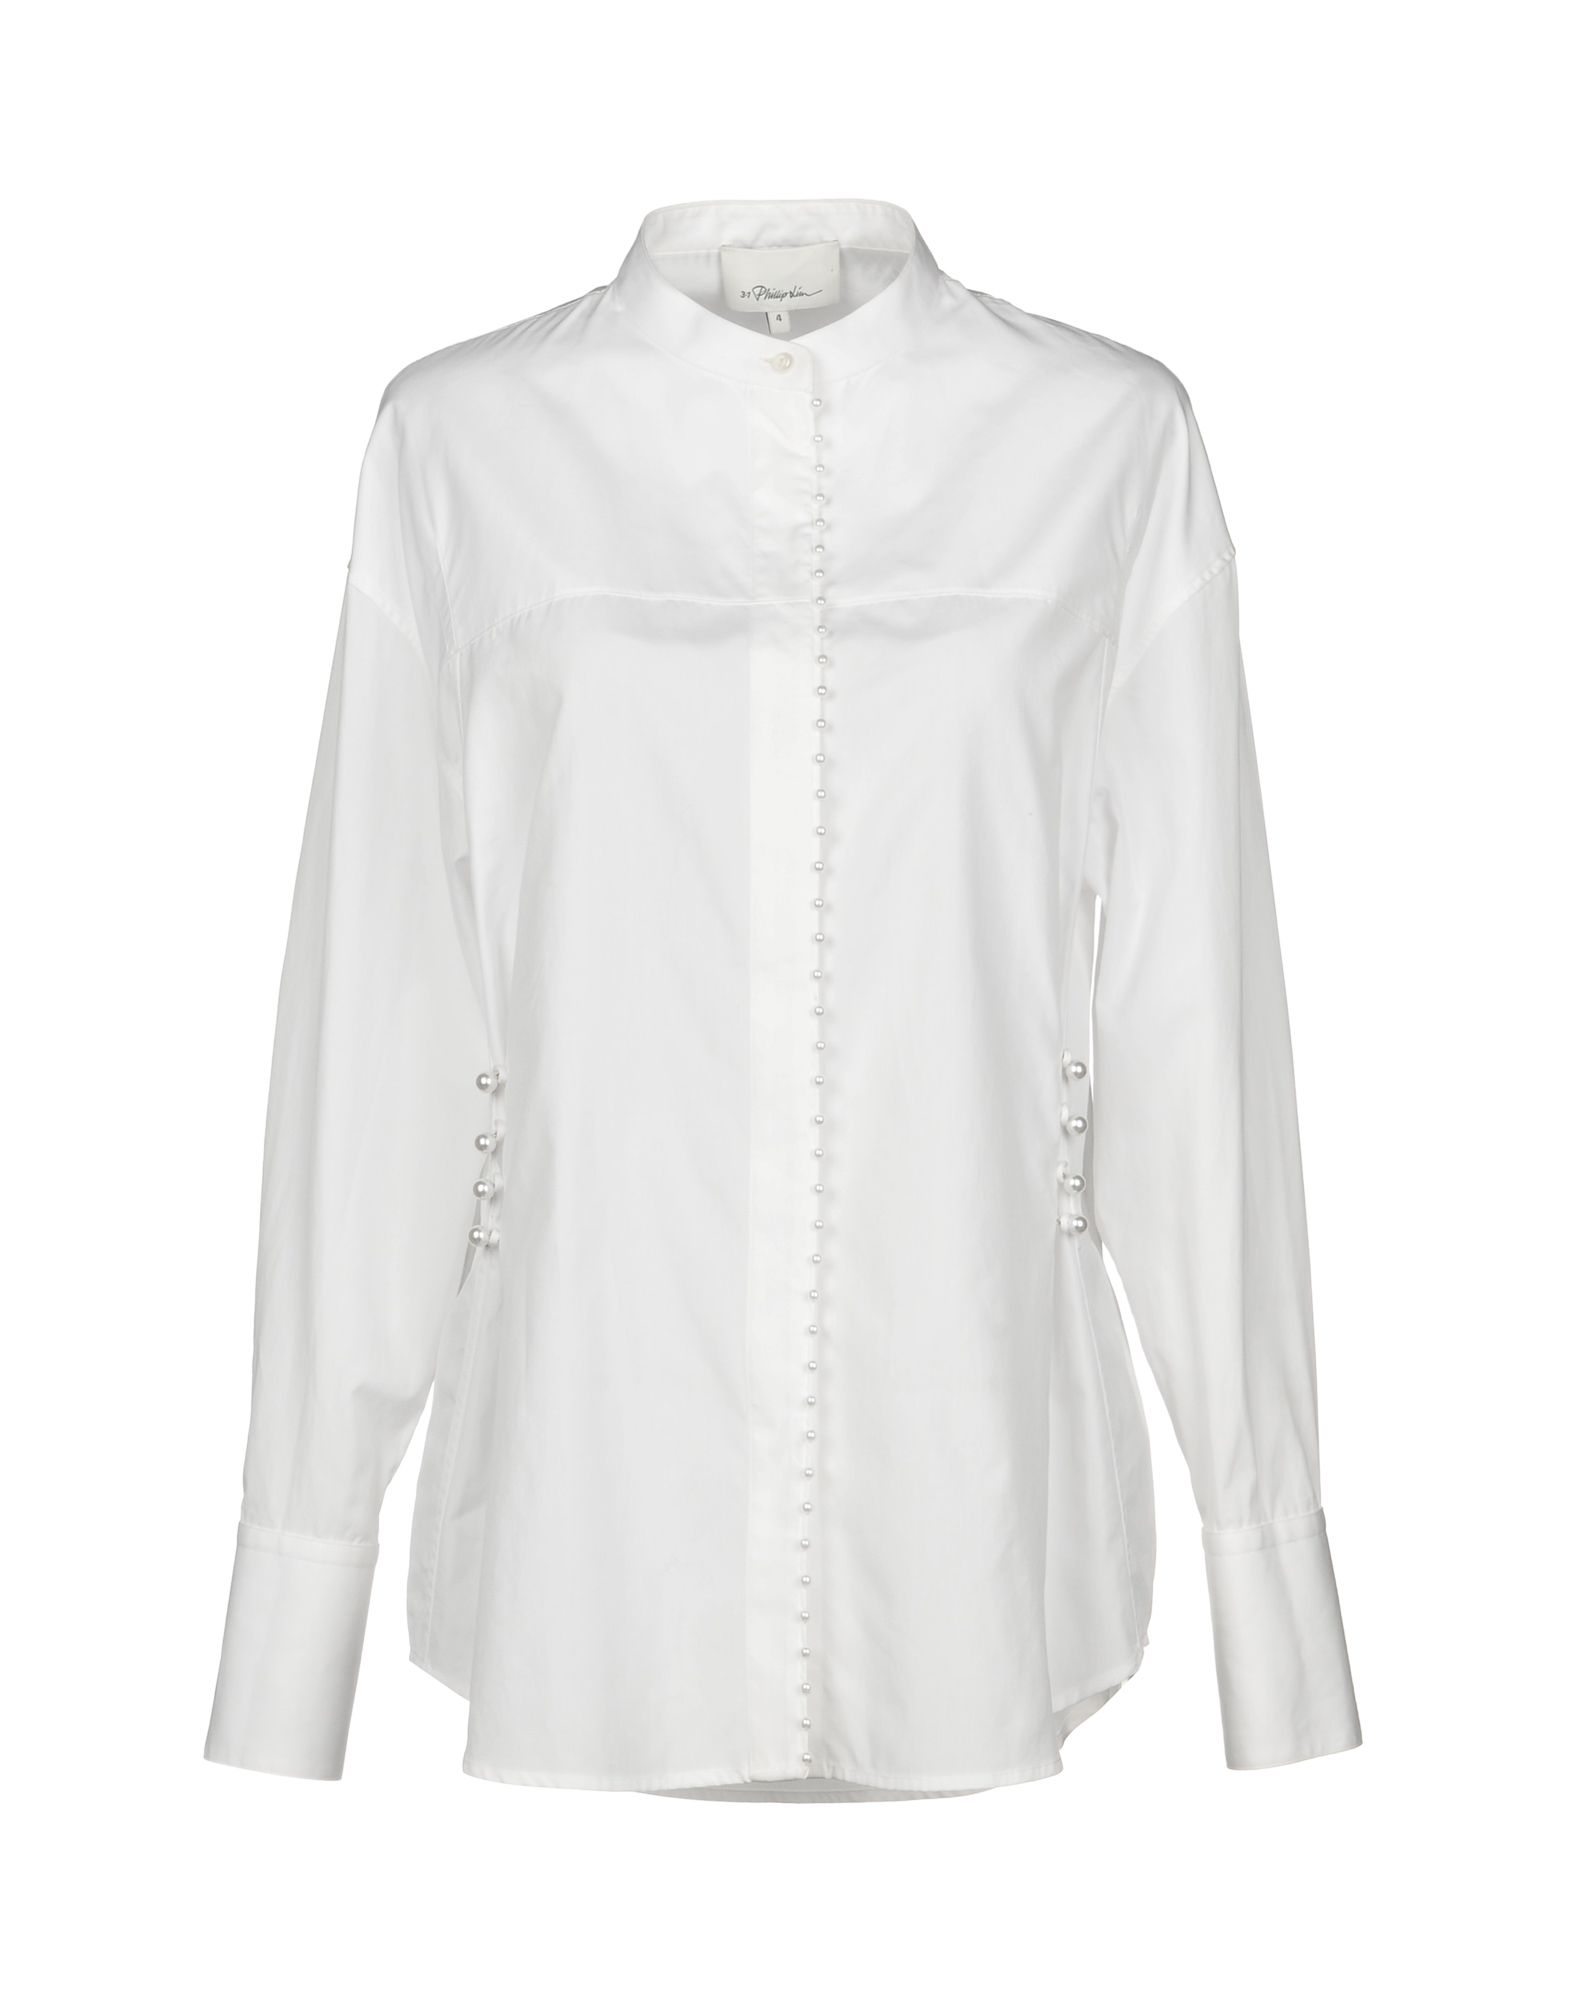 3.1 PHILLIP LIM / フィリップ リム Solid color shirts & blouses,38761979NI 5